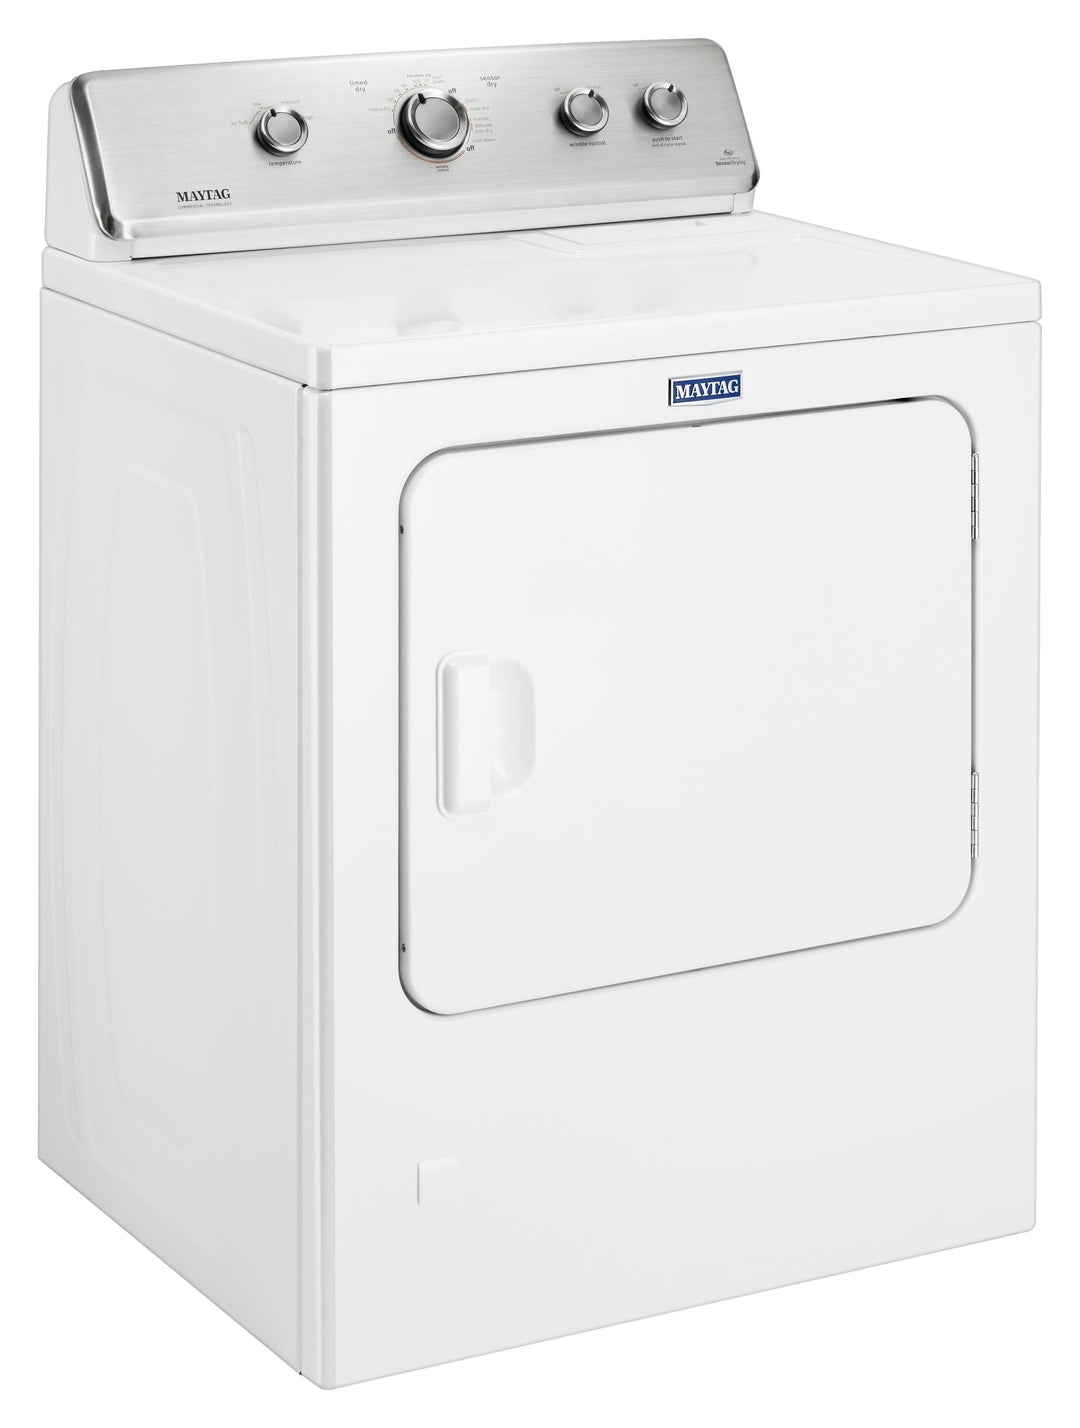 Maytag - 7 Cu. Ft. Electric Dryer with Wrinkle Control Option - White_3